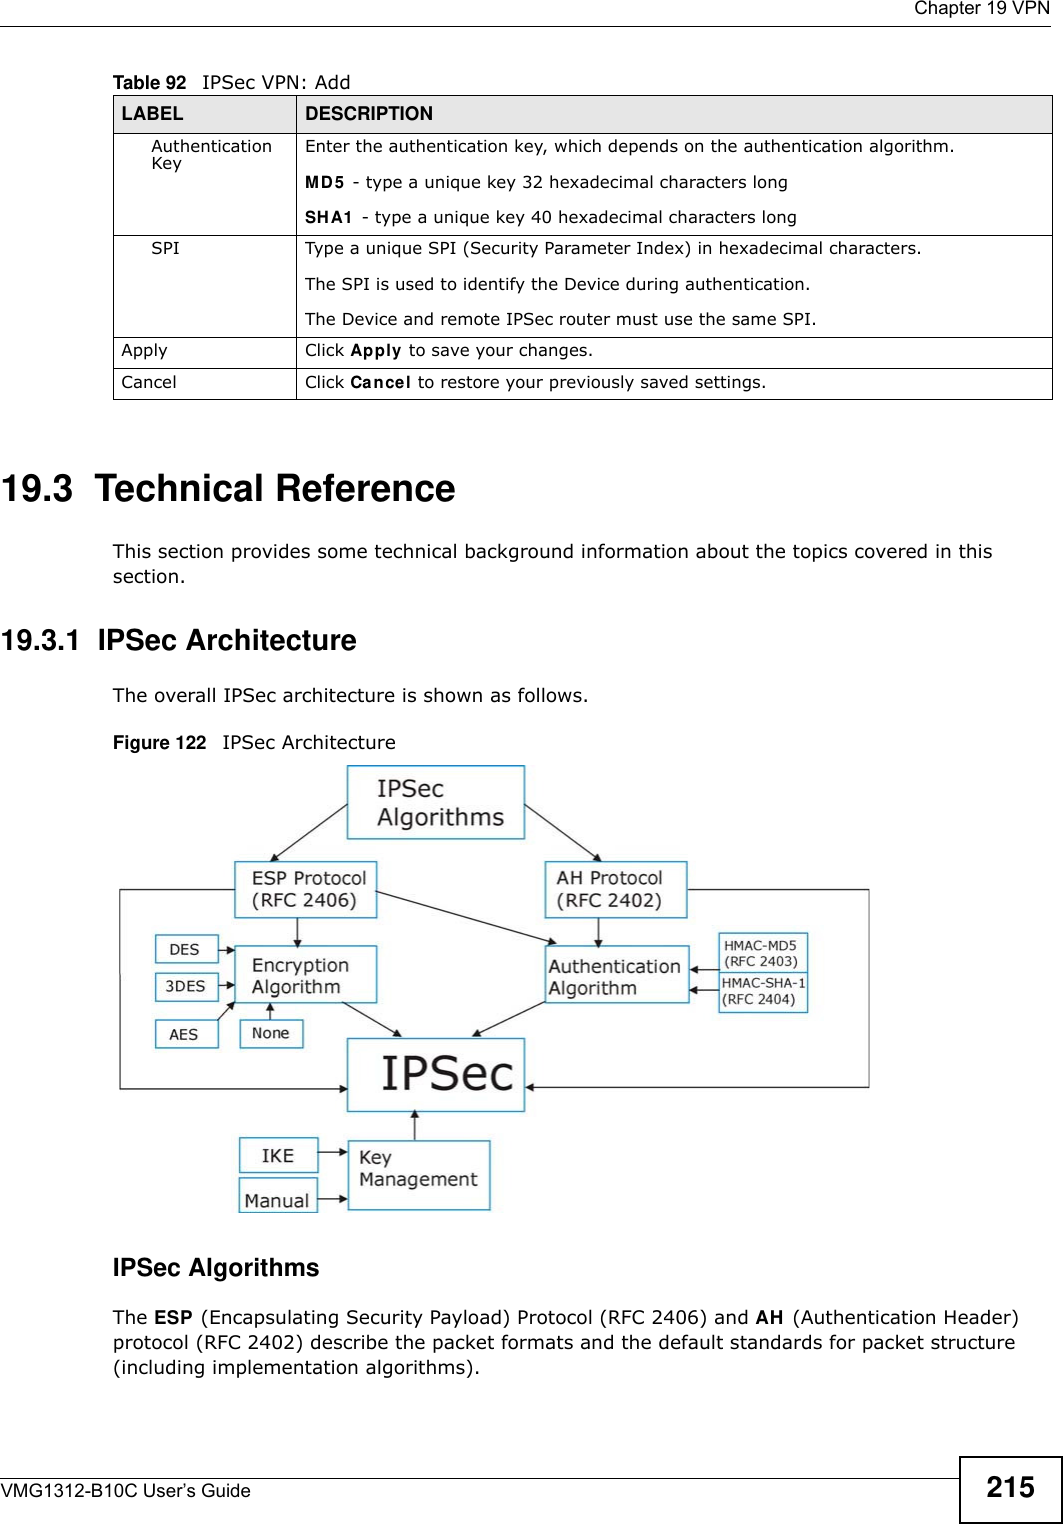  Chapter 19 VPNVMG1312-B10C User’s Guide 21519.3  Technical ReferenceThis section provides some technical background information about the topics covered in this section.19.3.1  IPSec ArchitectureThe overall IPSec architecture is shown as follows.Figure 122   IPSec ArchitectureIPSec AlgorithmsThe ESP (Encapsulating Security Payload) Protocol (RFC 2406) and AH (Authentication Header) protocol (RFC 2402) describe the packet formats and the default standards for packet structure (including implementation algorithms).Authentication Key Enter the authentication key, which depends on the authentication algorithm.MD5  - type a unique key 32 hexadecimal characters longSH A1  - type a unique key 40 hexadecimal characters longSPI Type a unique SPI (Security Parameter Index) in hexadecimal characters.The SPI is used to identify the Device during authentication.The Device and remote IPSec router must use the same SPI.Apply Click Apply to save your changes.Cancel Click Cancel to restore your previously saved settings.Table 92   IPSec VPN: AddLABEL DESCRIPTION